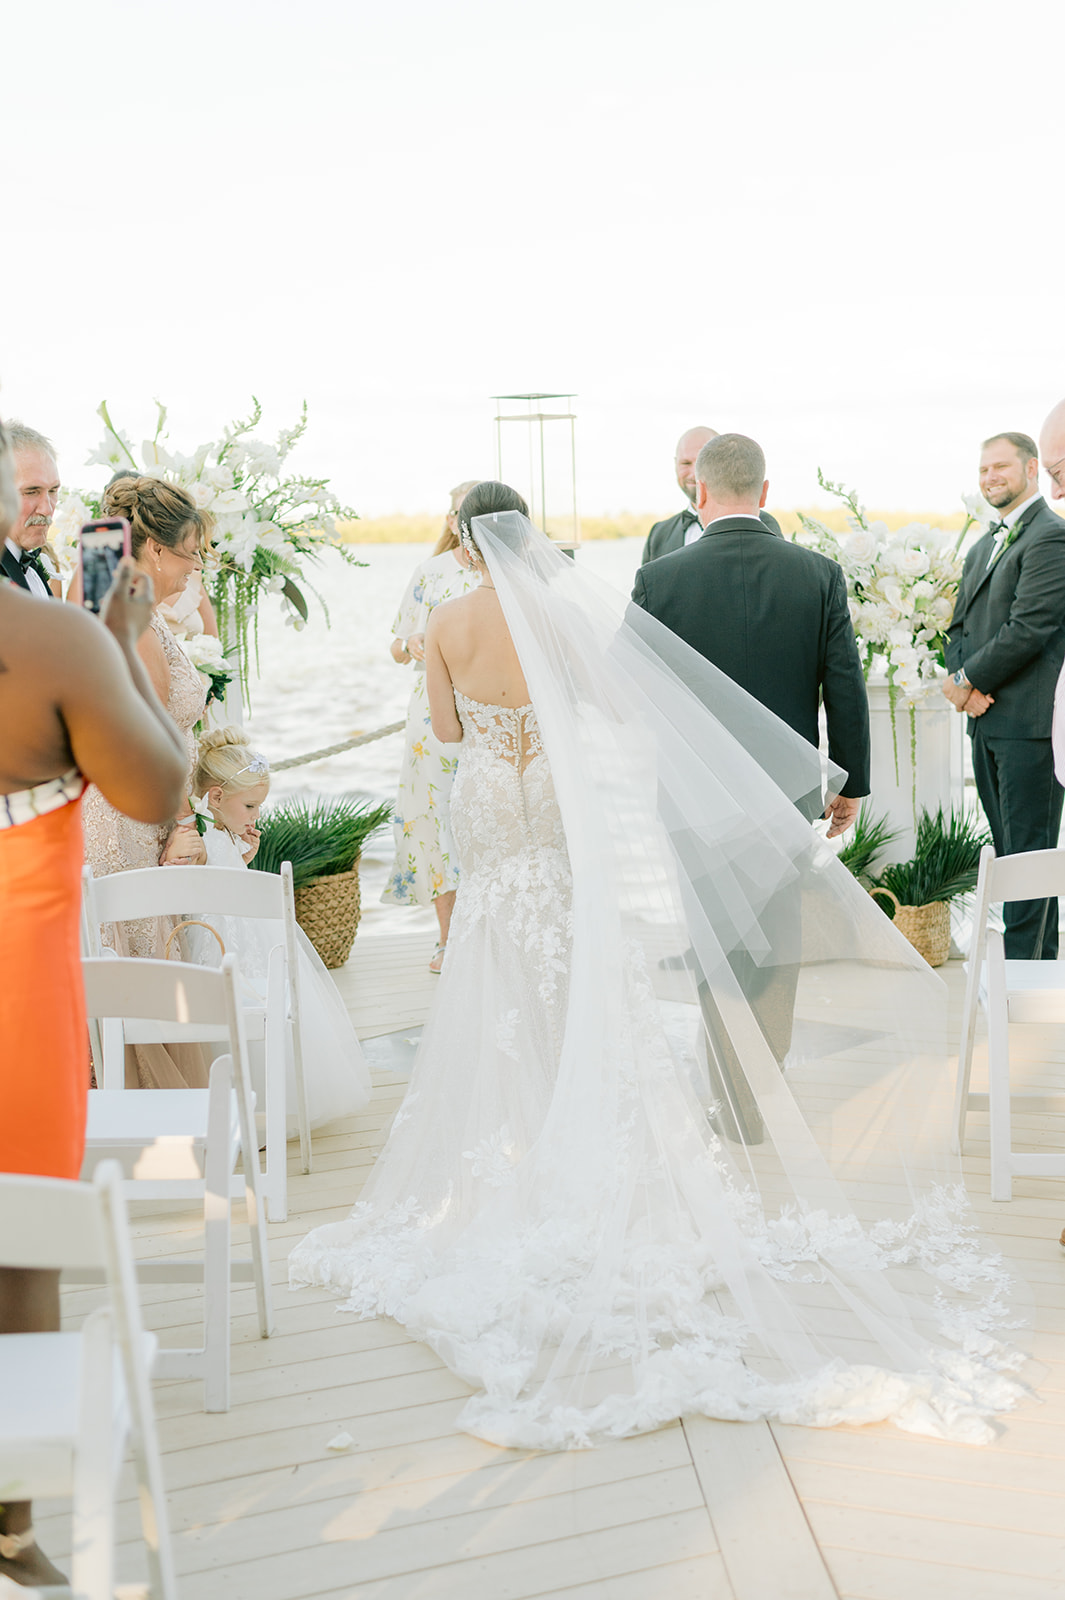 Naples Florida Photographer for Your Dream Wedding Day - A Story in Images
